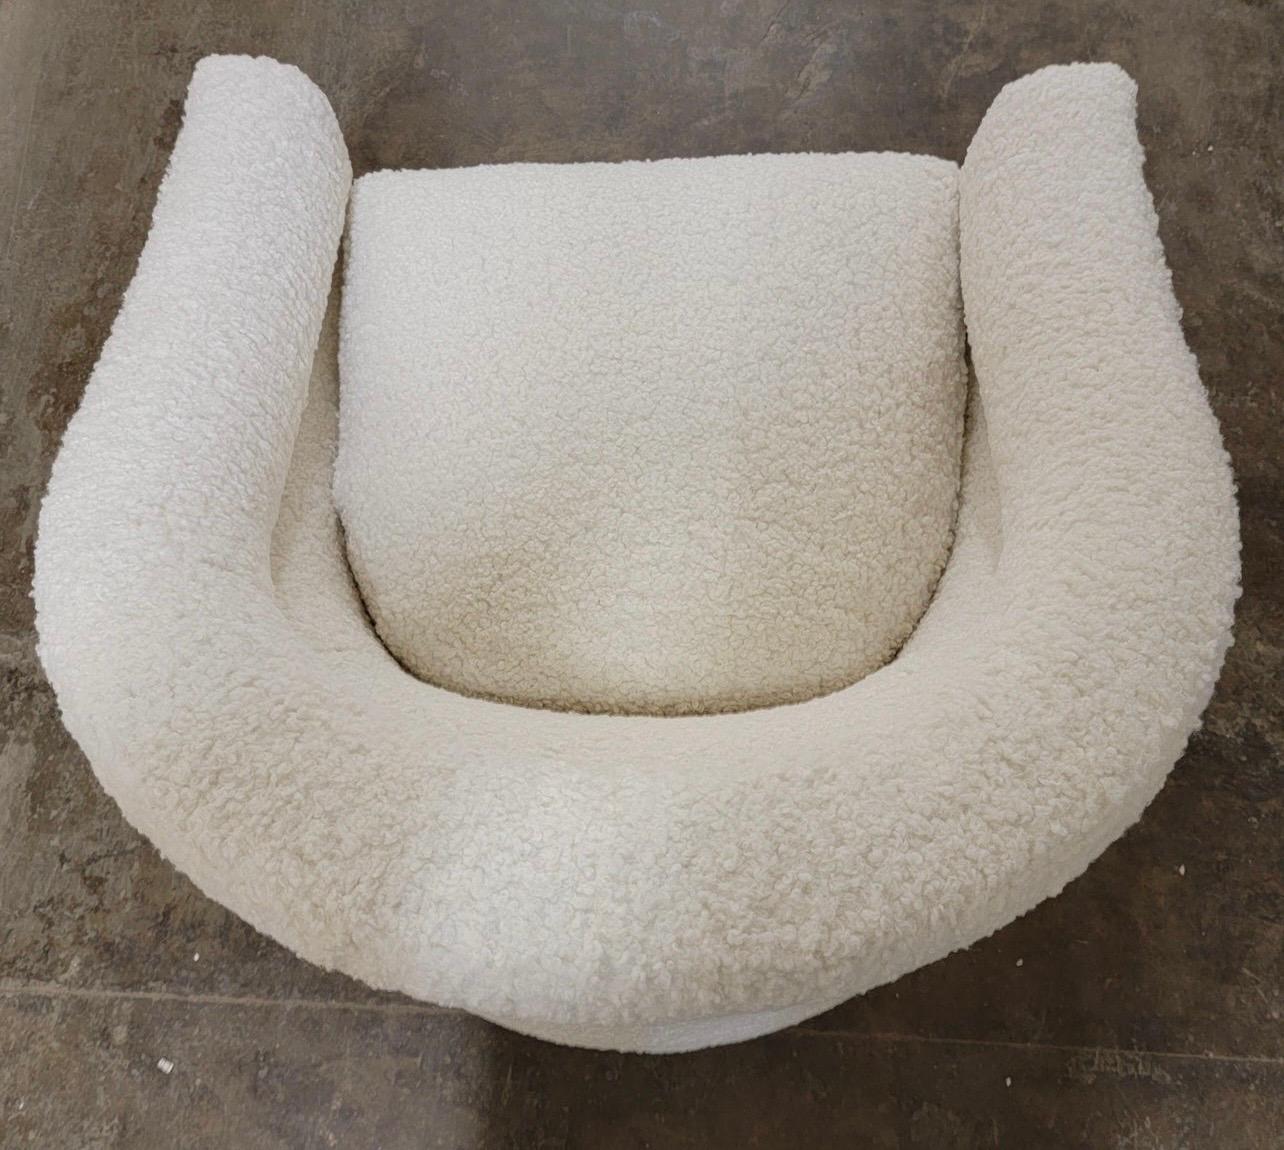 A stunning pair of curved form barrel back swivel chairs, circa 1970s by Jalen which was a small custom manufacturer. They have been newly reupholstered in a boucle faux shearling fabric which gives this set not only a luxurious look but a